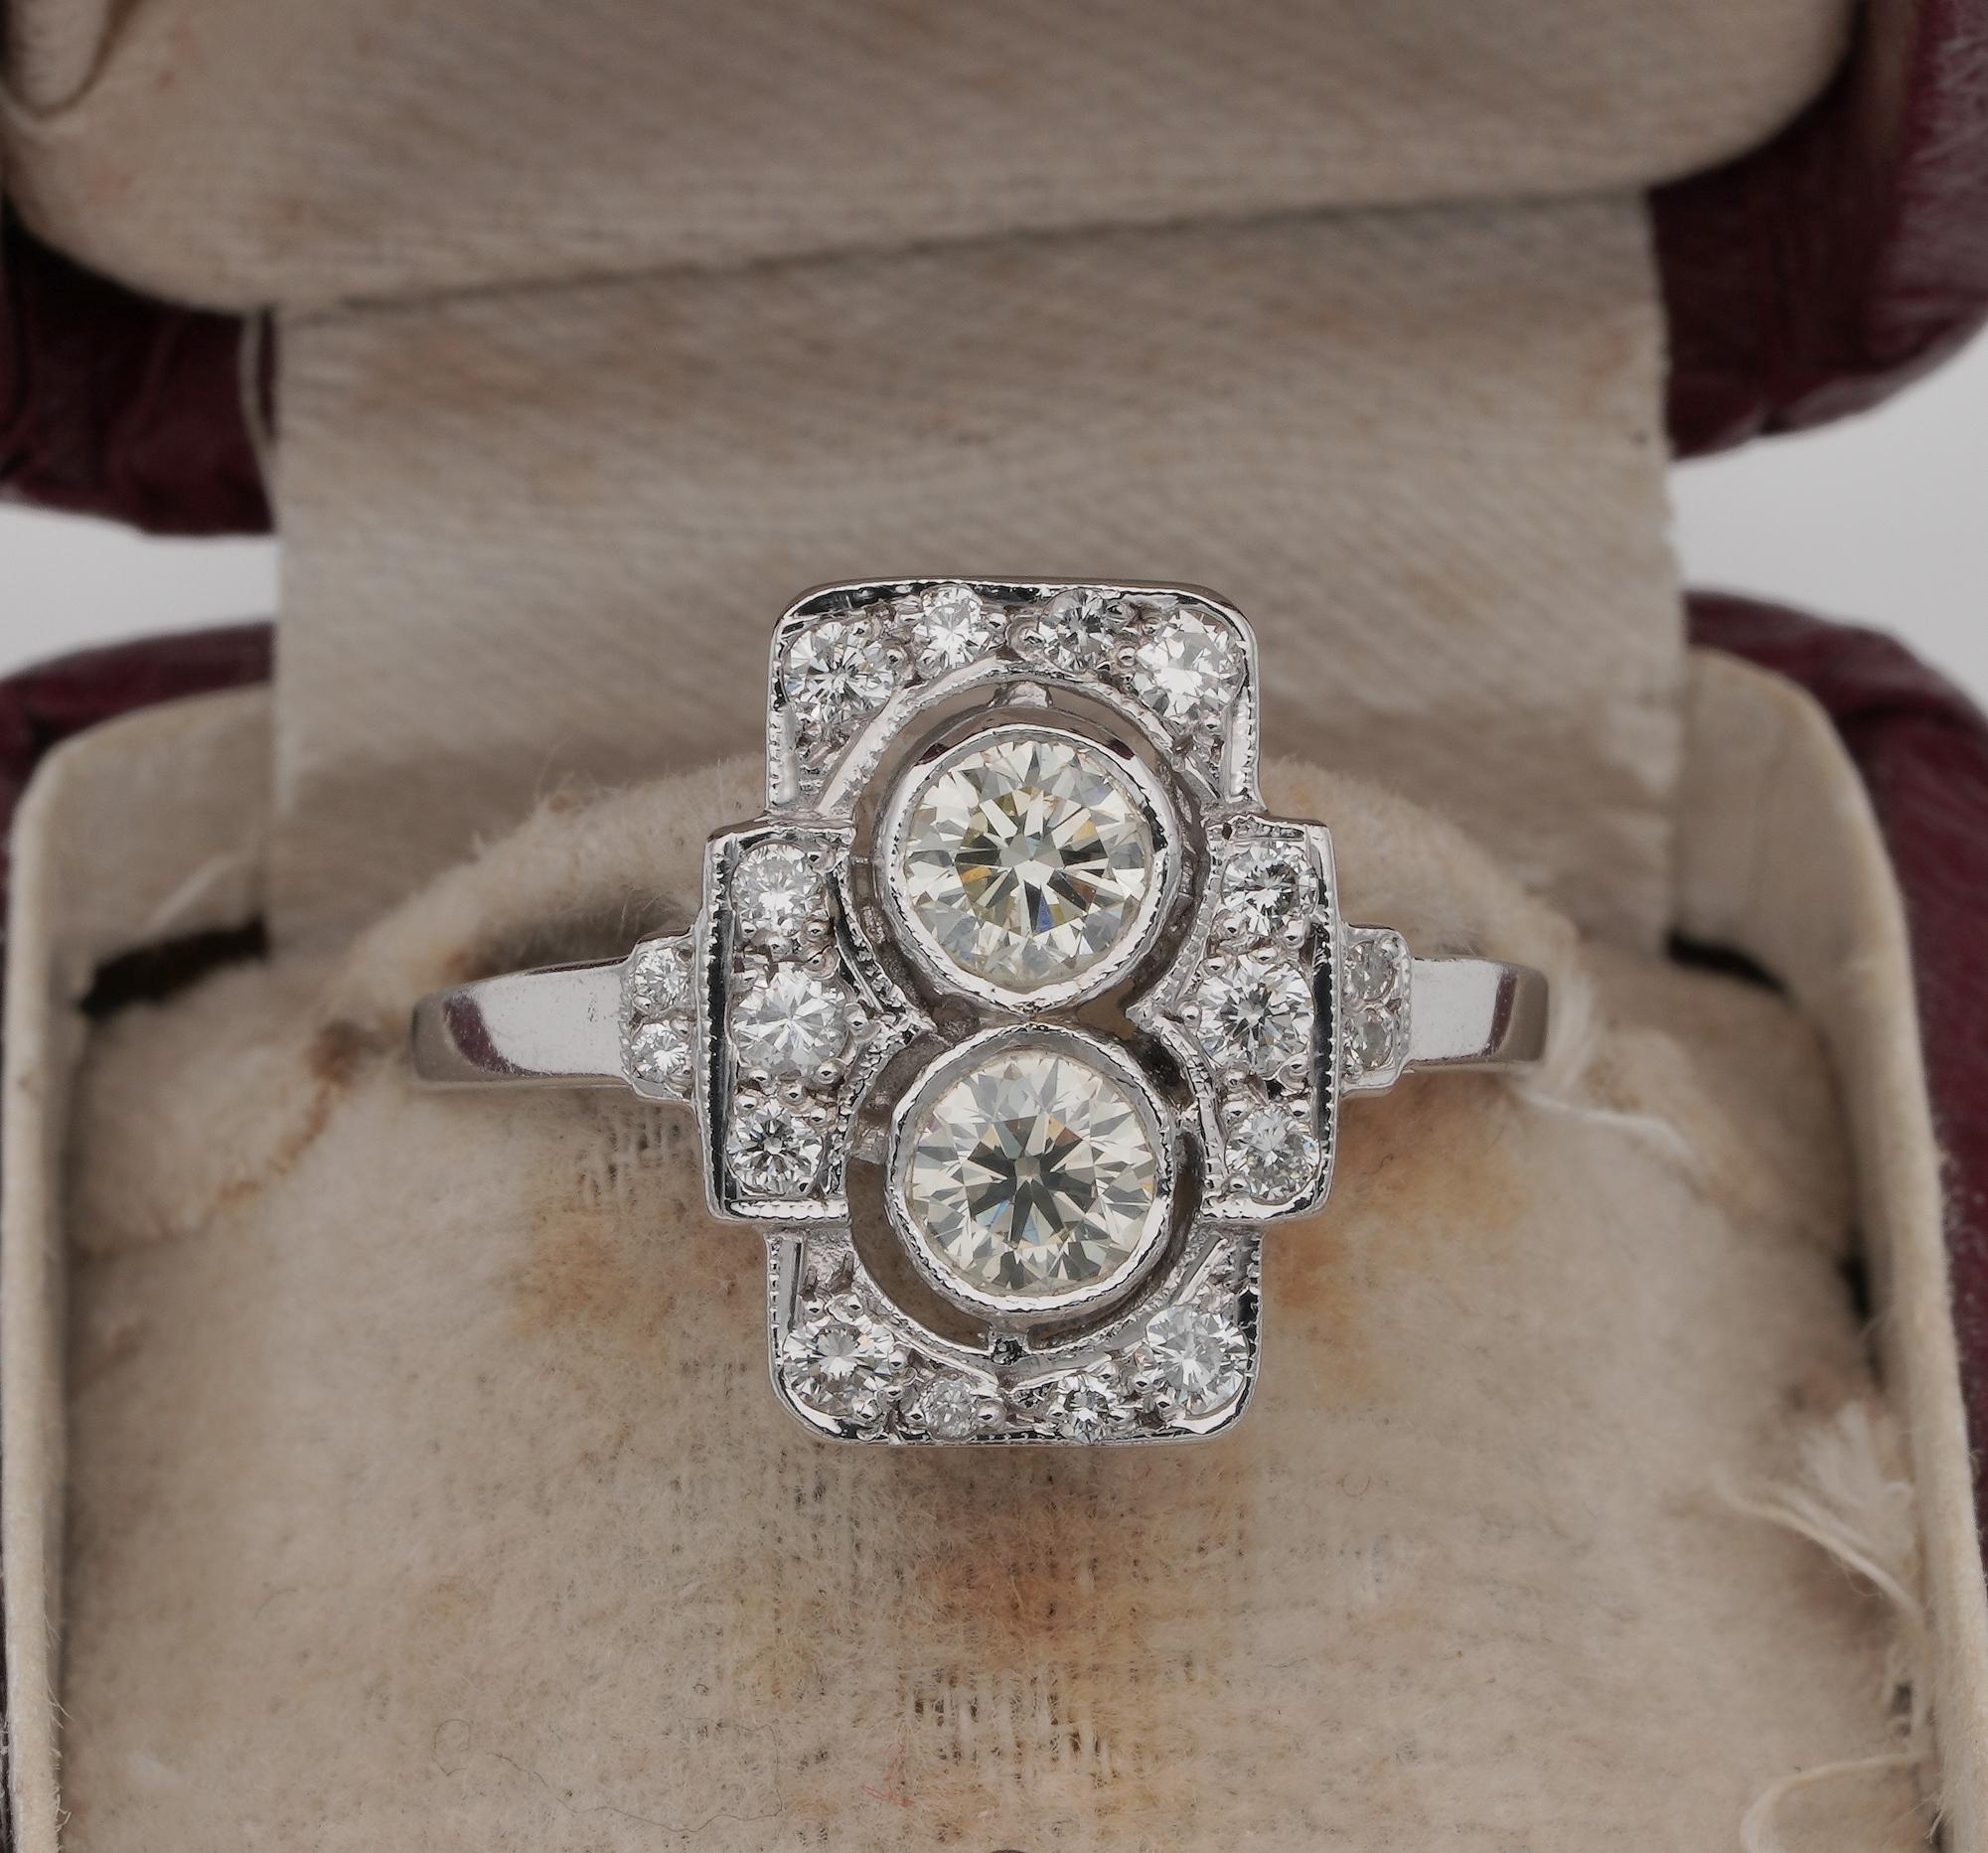 his is a very charming late Art Deco ring, in lovely rectangular crown starring a duo of Diamonds in the main panel with extra surrounding of Diamonds adding lots of power to the sparkling crown. Ring is 1935 ca, hand crafted of solid 18 KT white